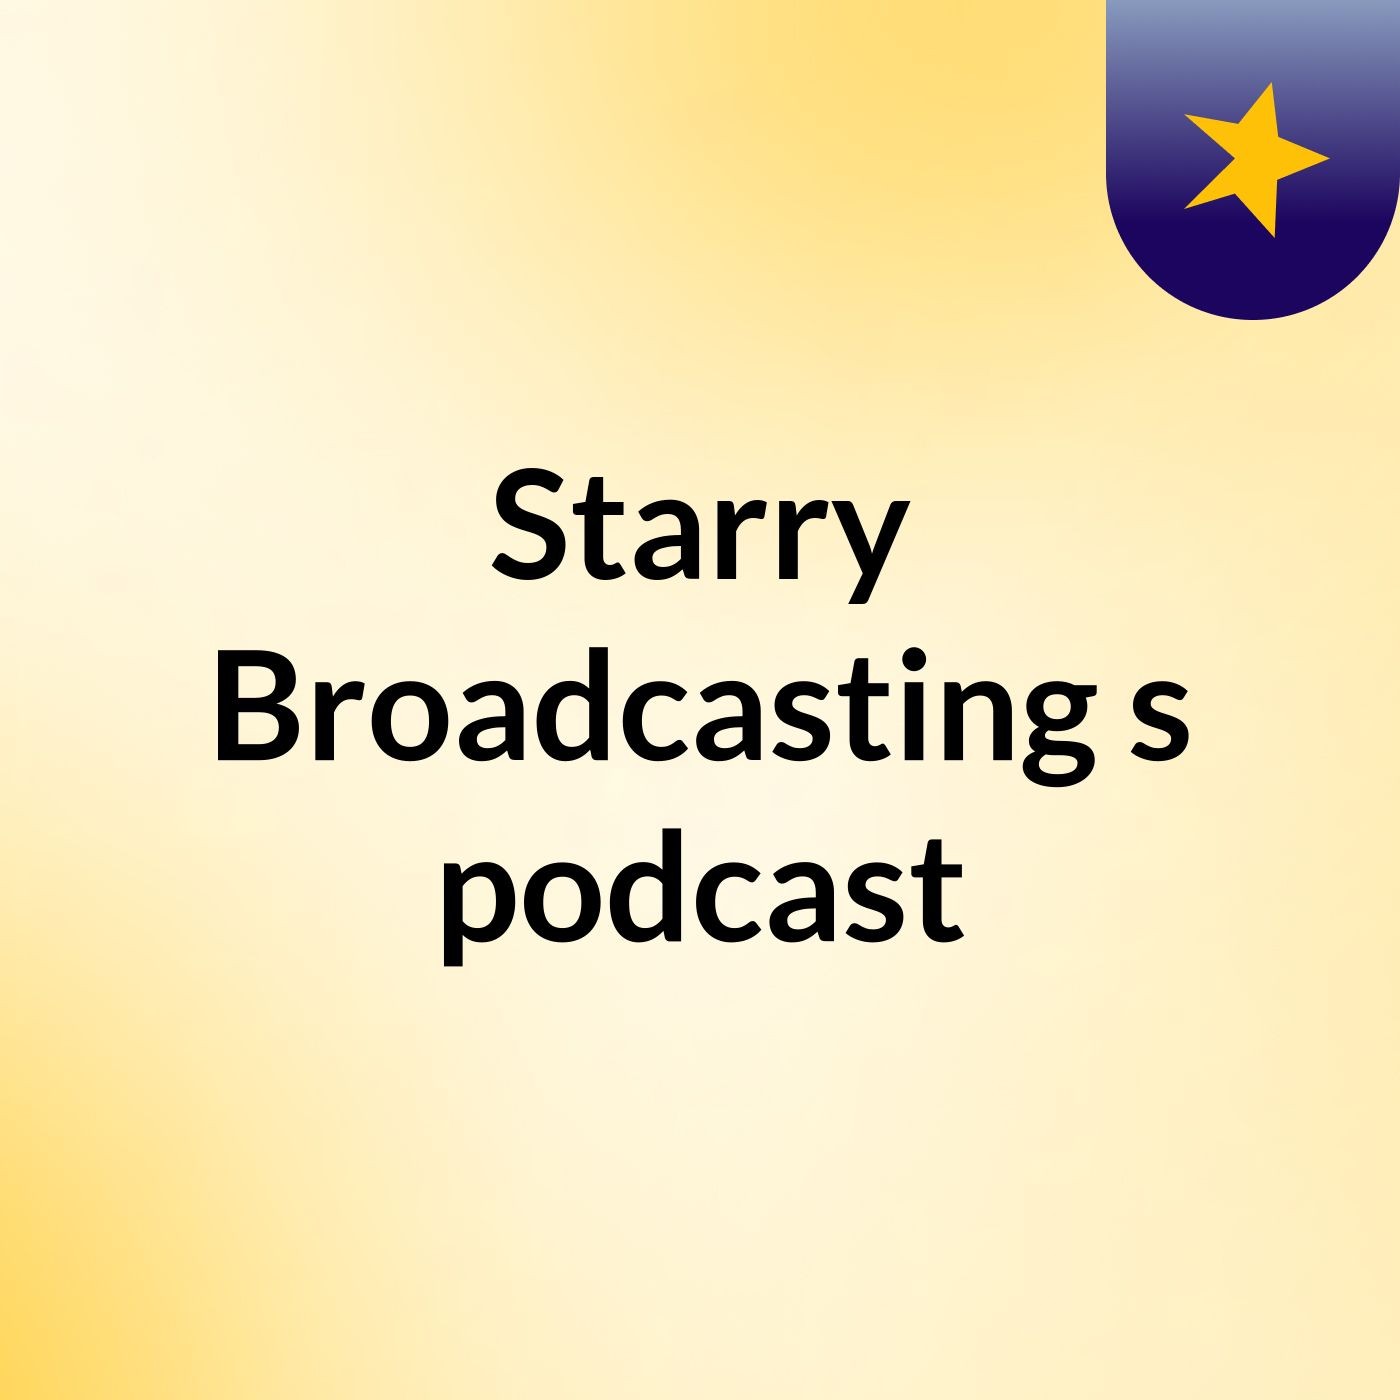 Episode 2 - Starry Broadcasting's podcast